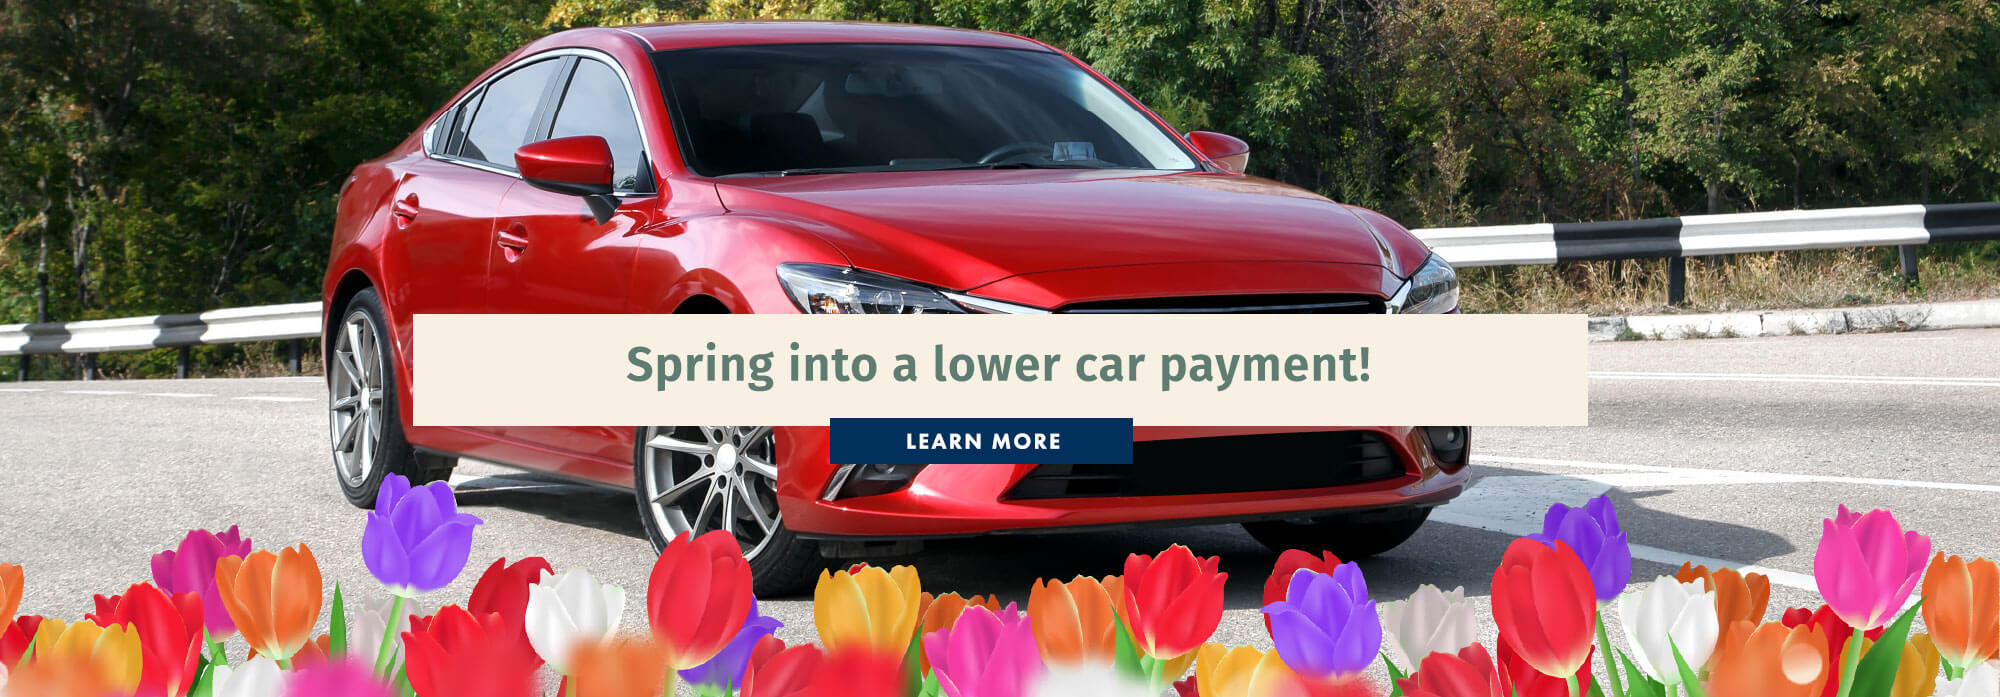 Spring into a lower car payment! Learn More.